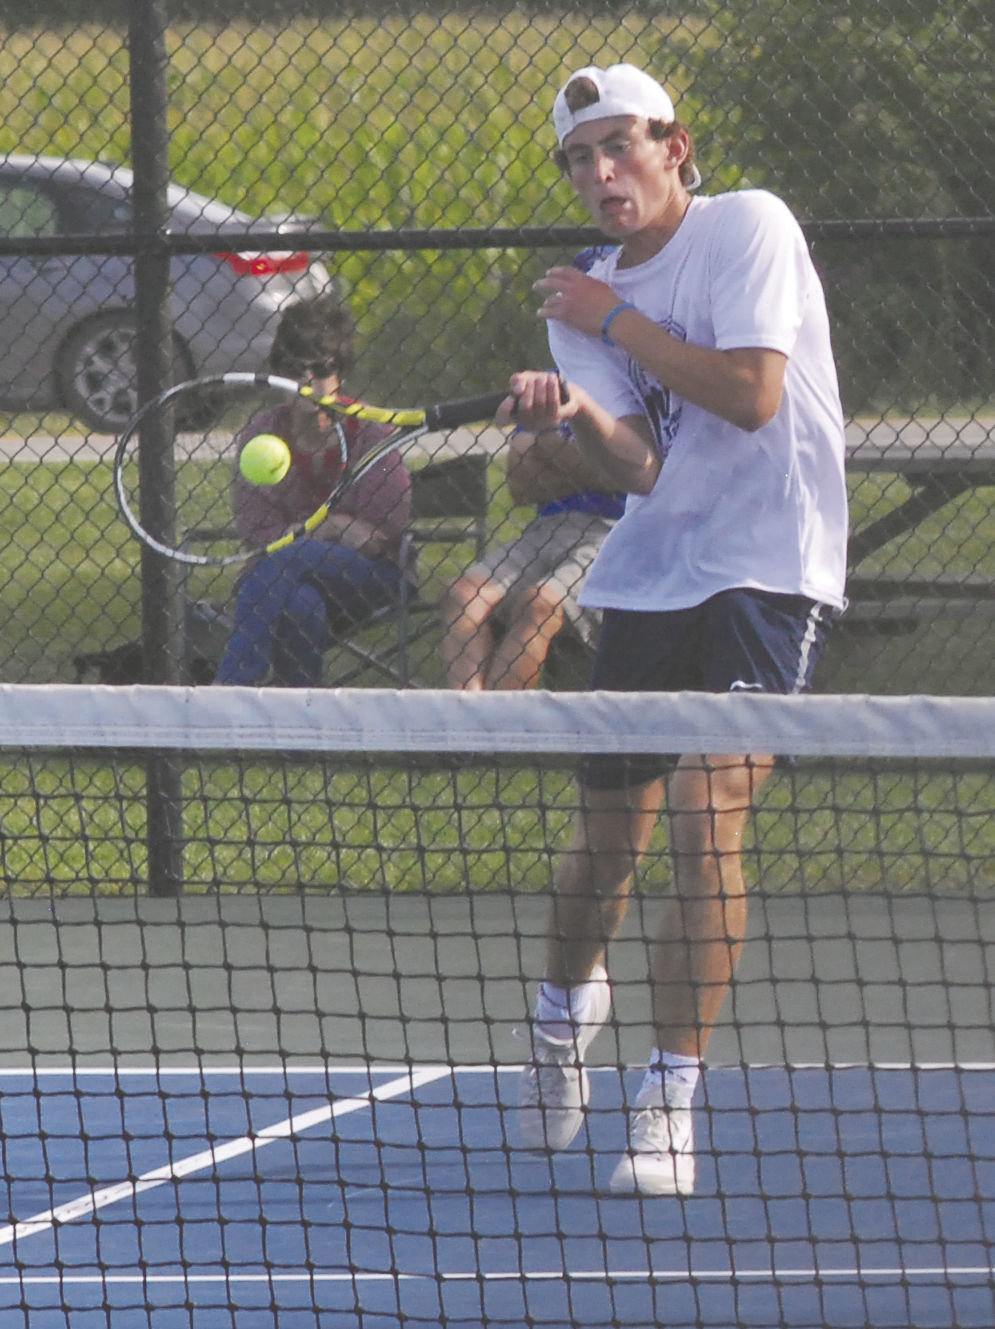 Carson Eberly picked up another win at No. 1 singles.